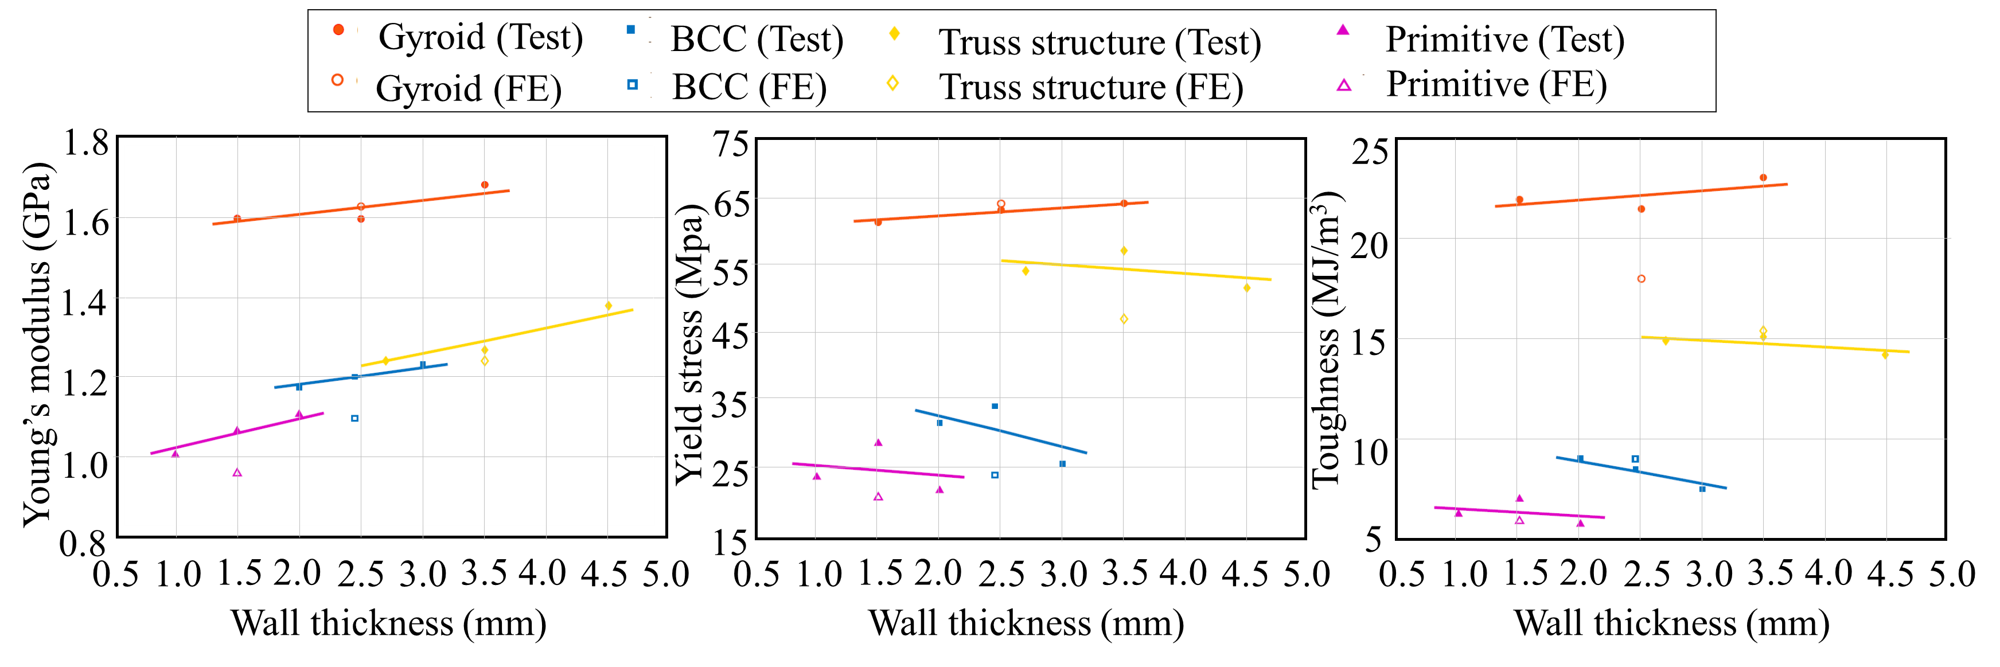 Normalized mechanical properties of the Gyroid, BCC, Truss and Primitive lattices with respect to the wall thickness, adapted from [11].